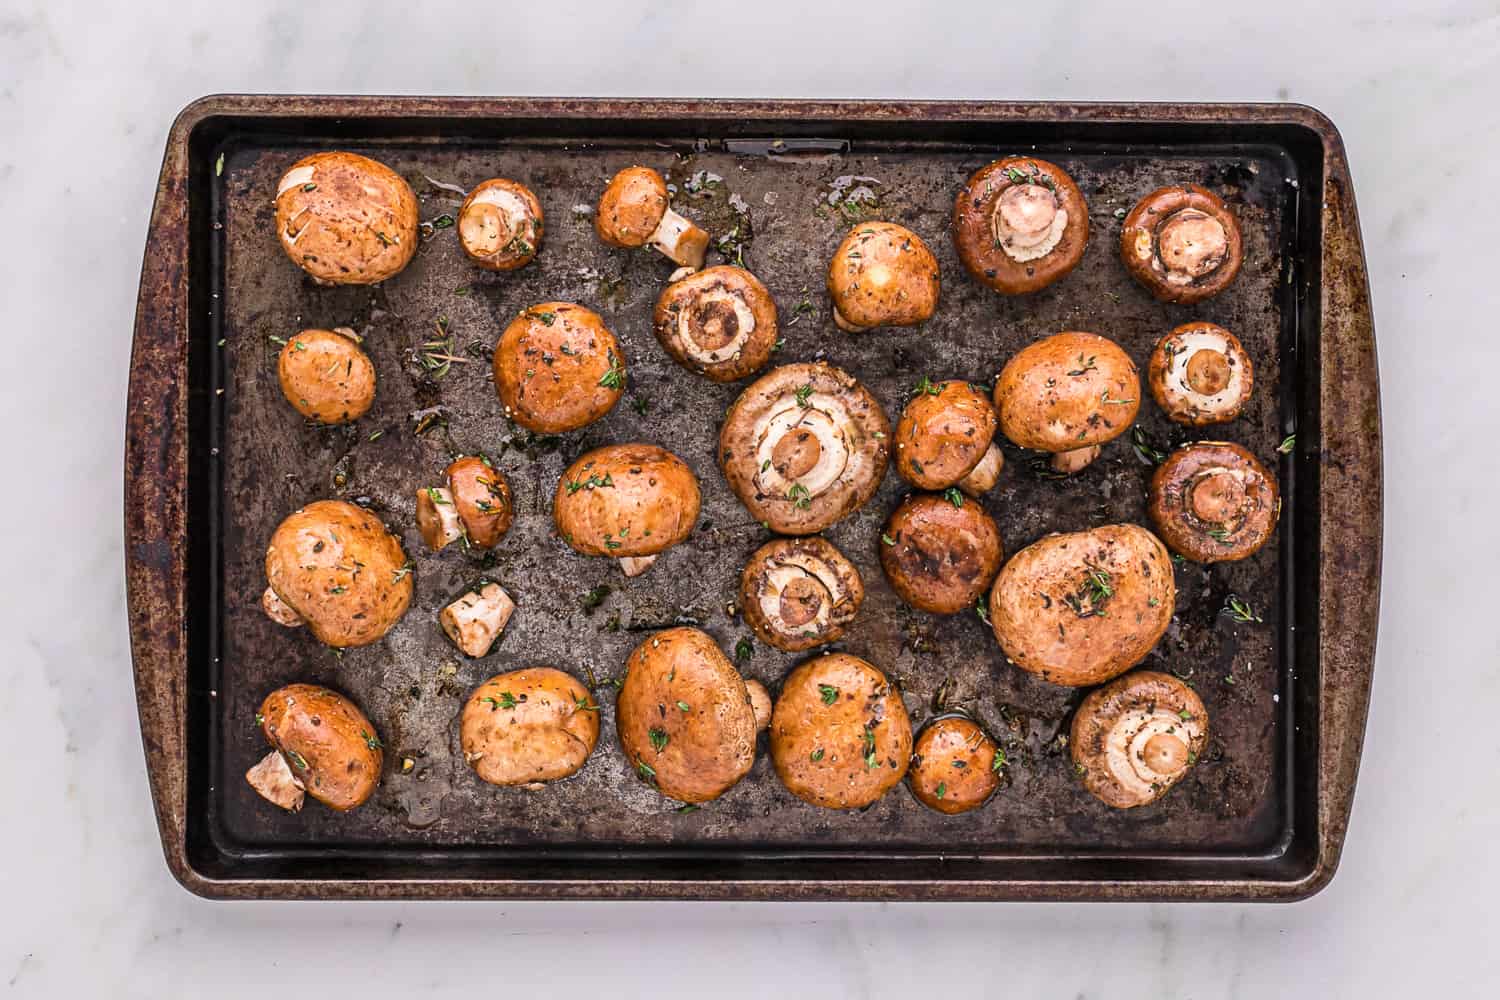 Uncooked mushrooms on a baking sheet.